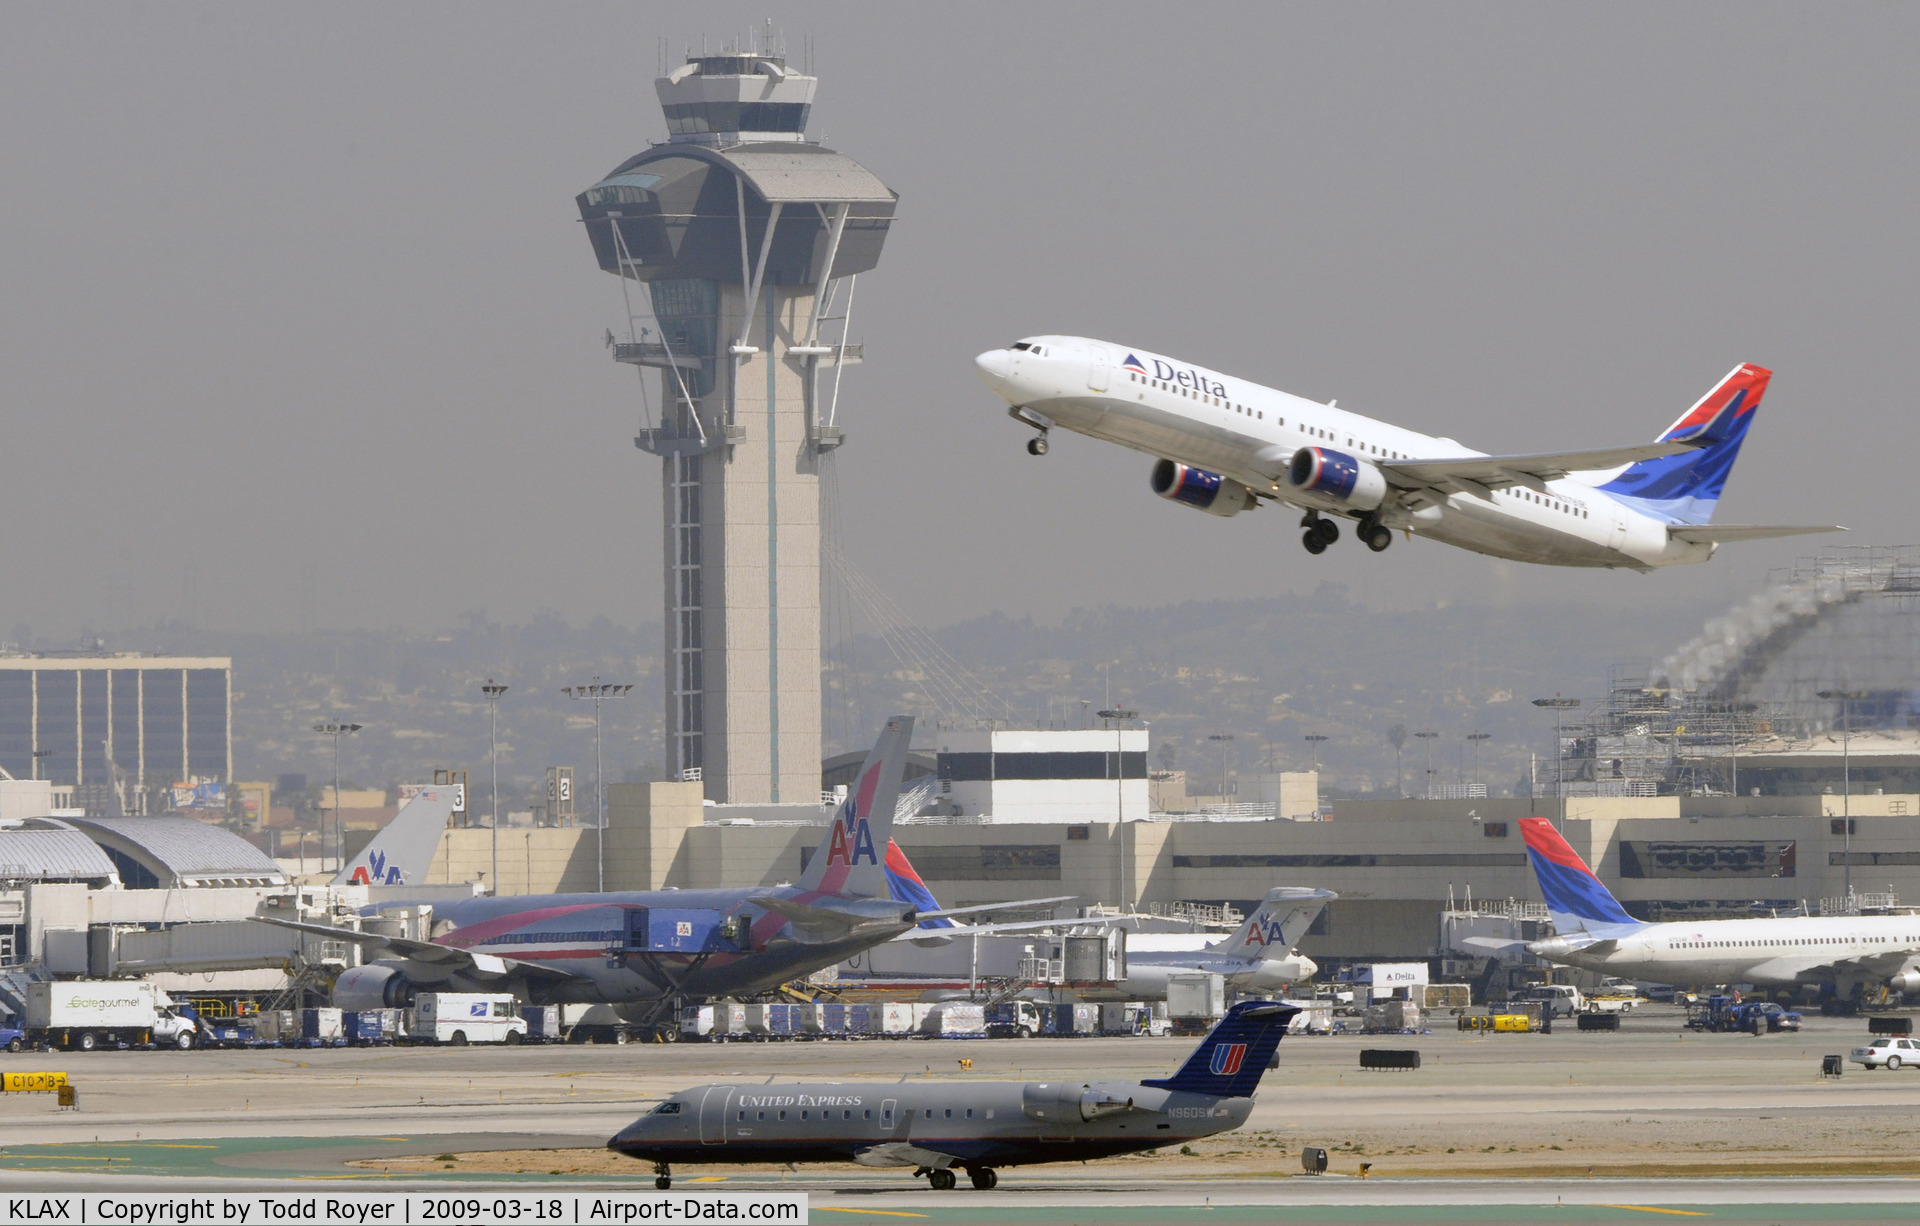 Los Angeles International Airport (LAX) - LAX control tower